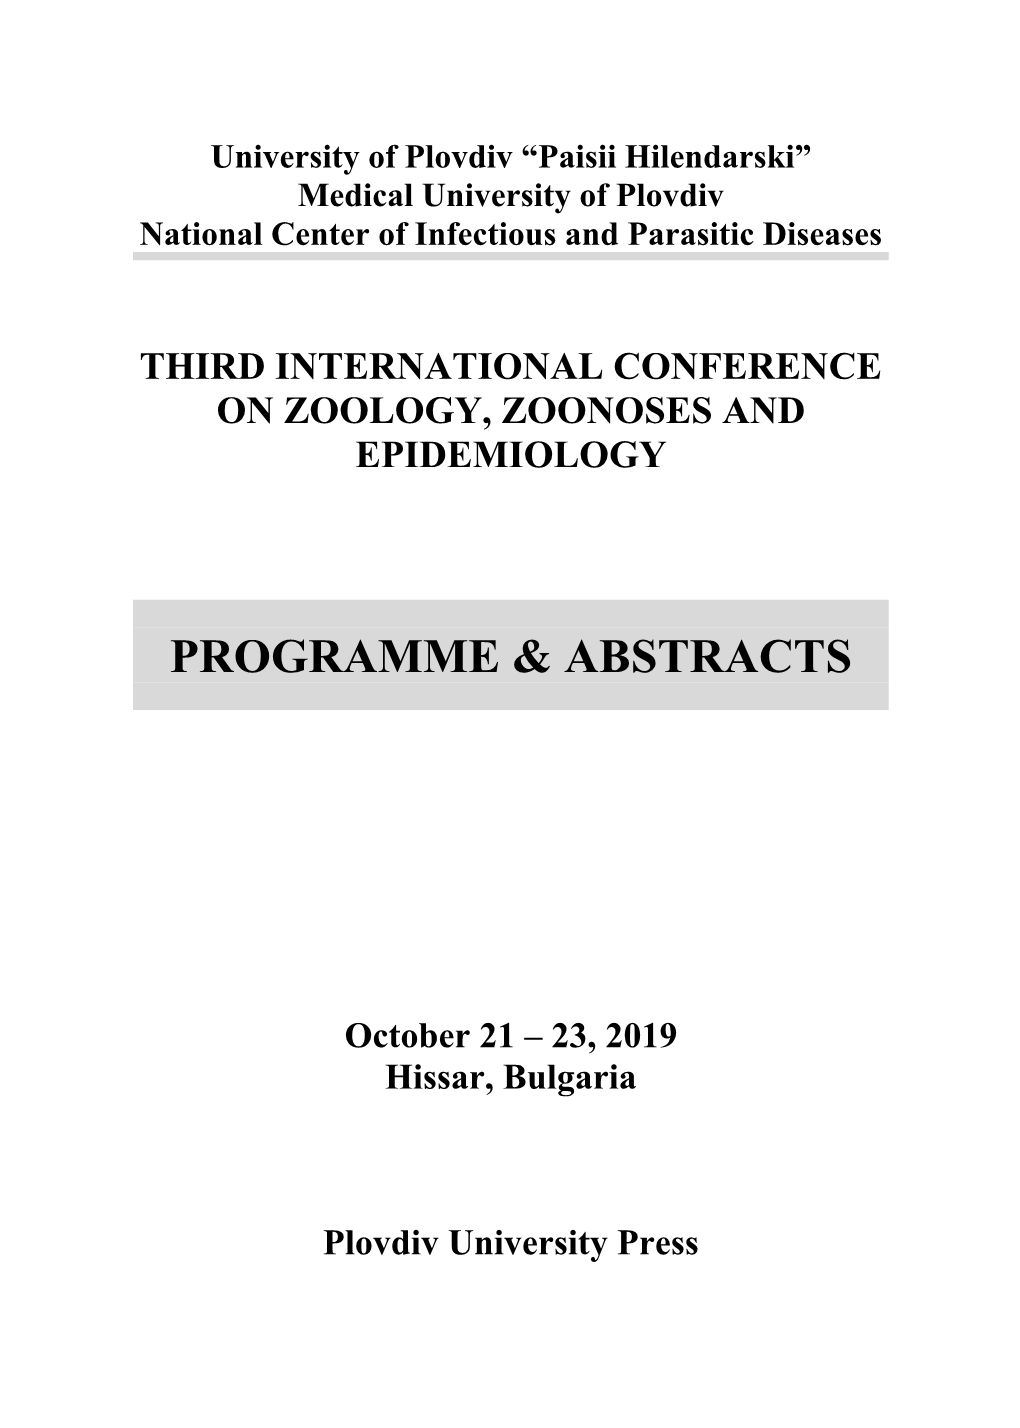 Third International Conference on Zoology, Zoonoses and Epidemiology